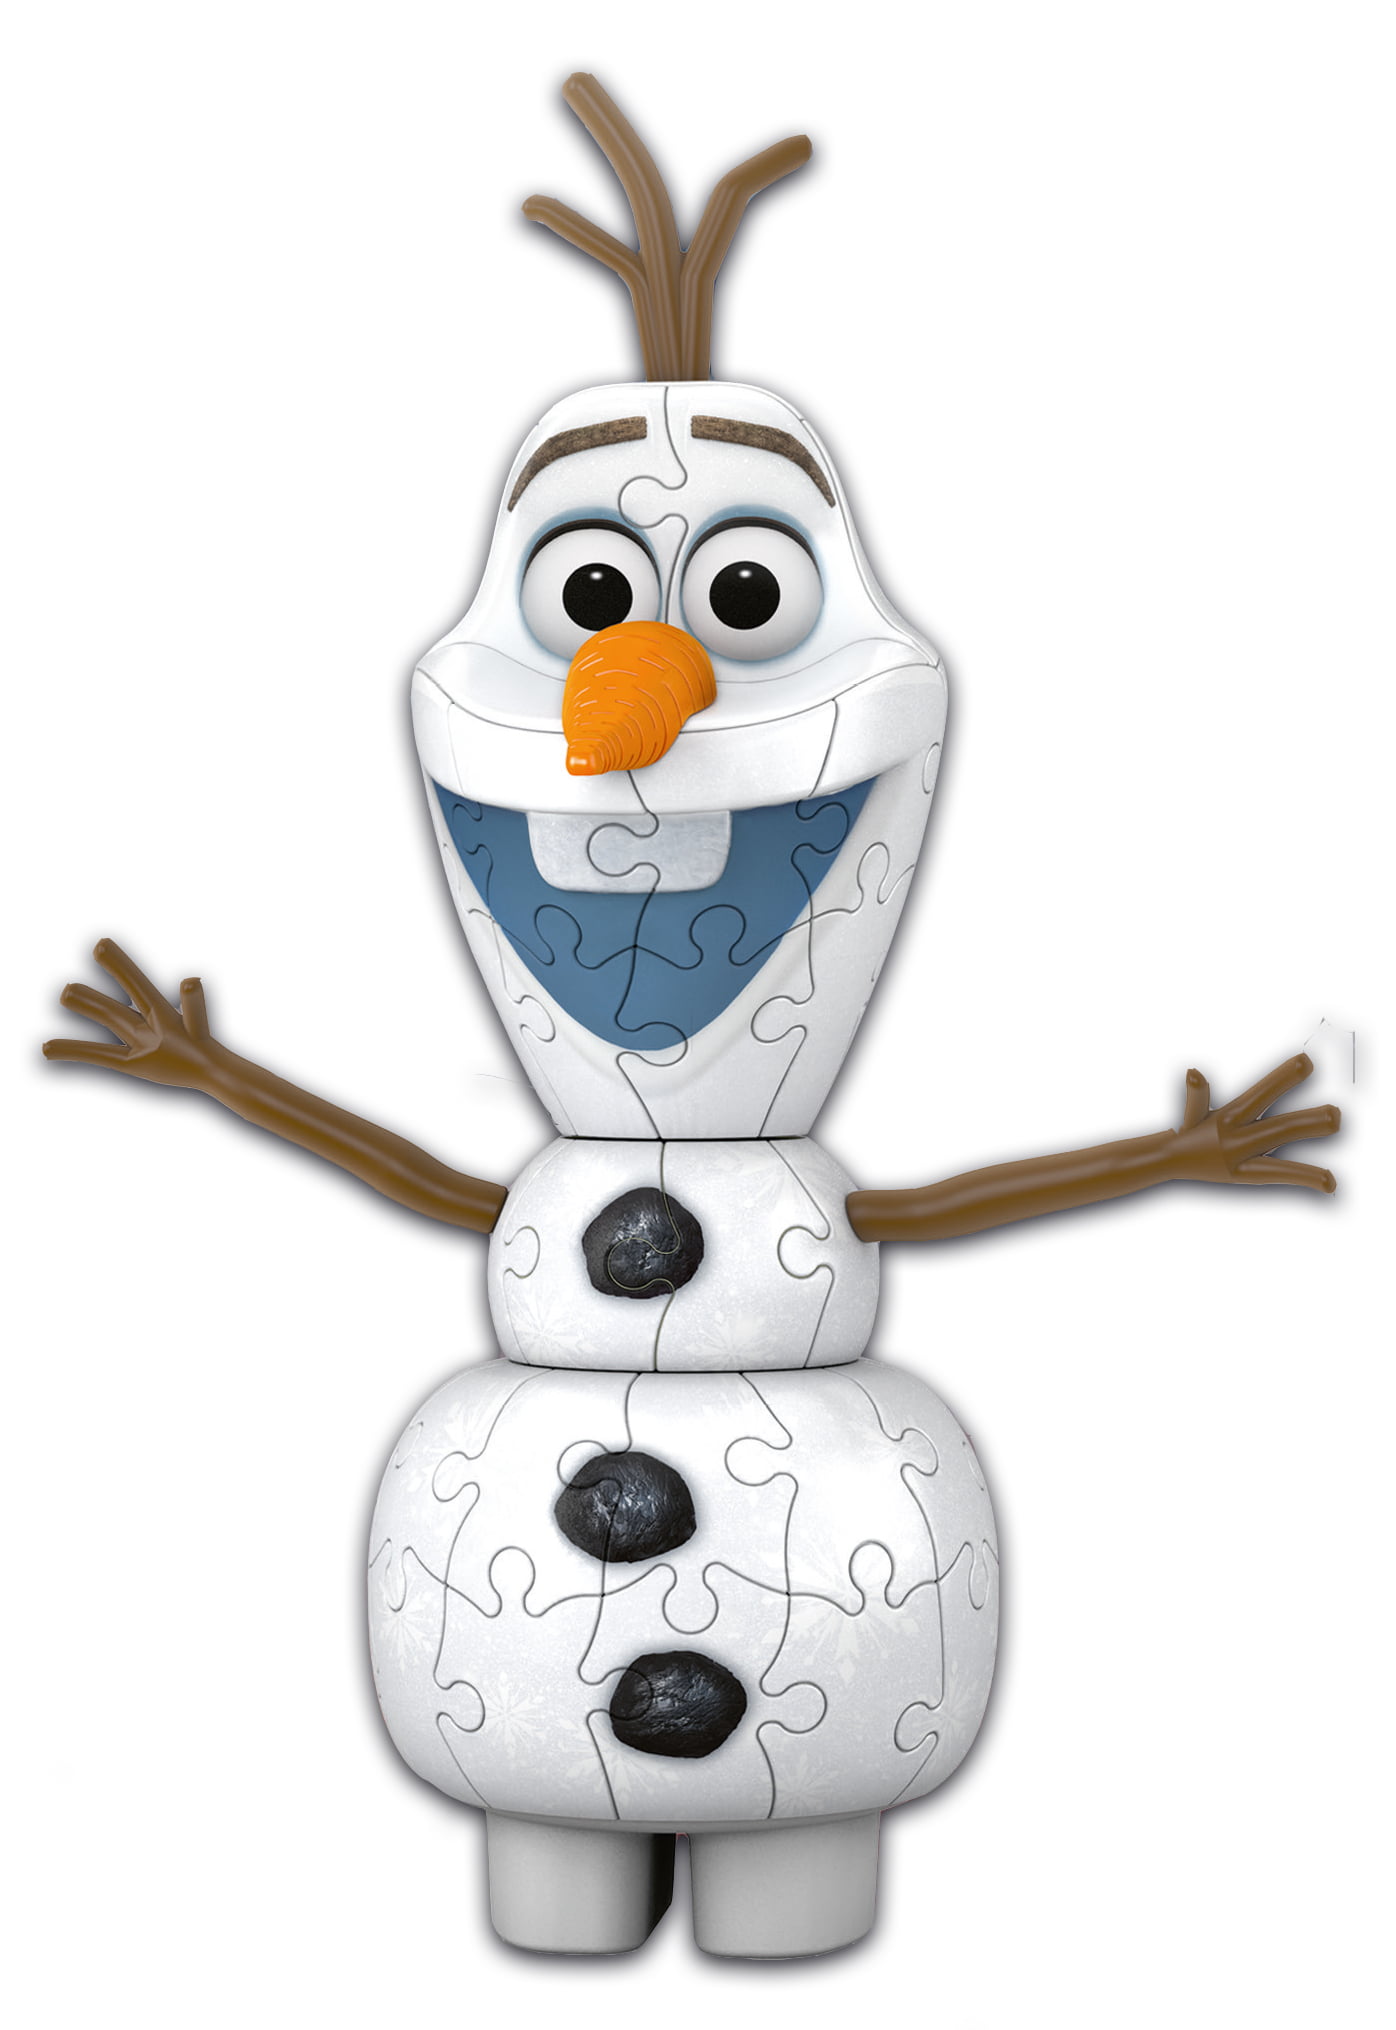 Disney Frozen 'Olaf' S Adventures' 3d 72 Piece Ball Jigsaw Puzzle Game New Gift 